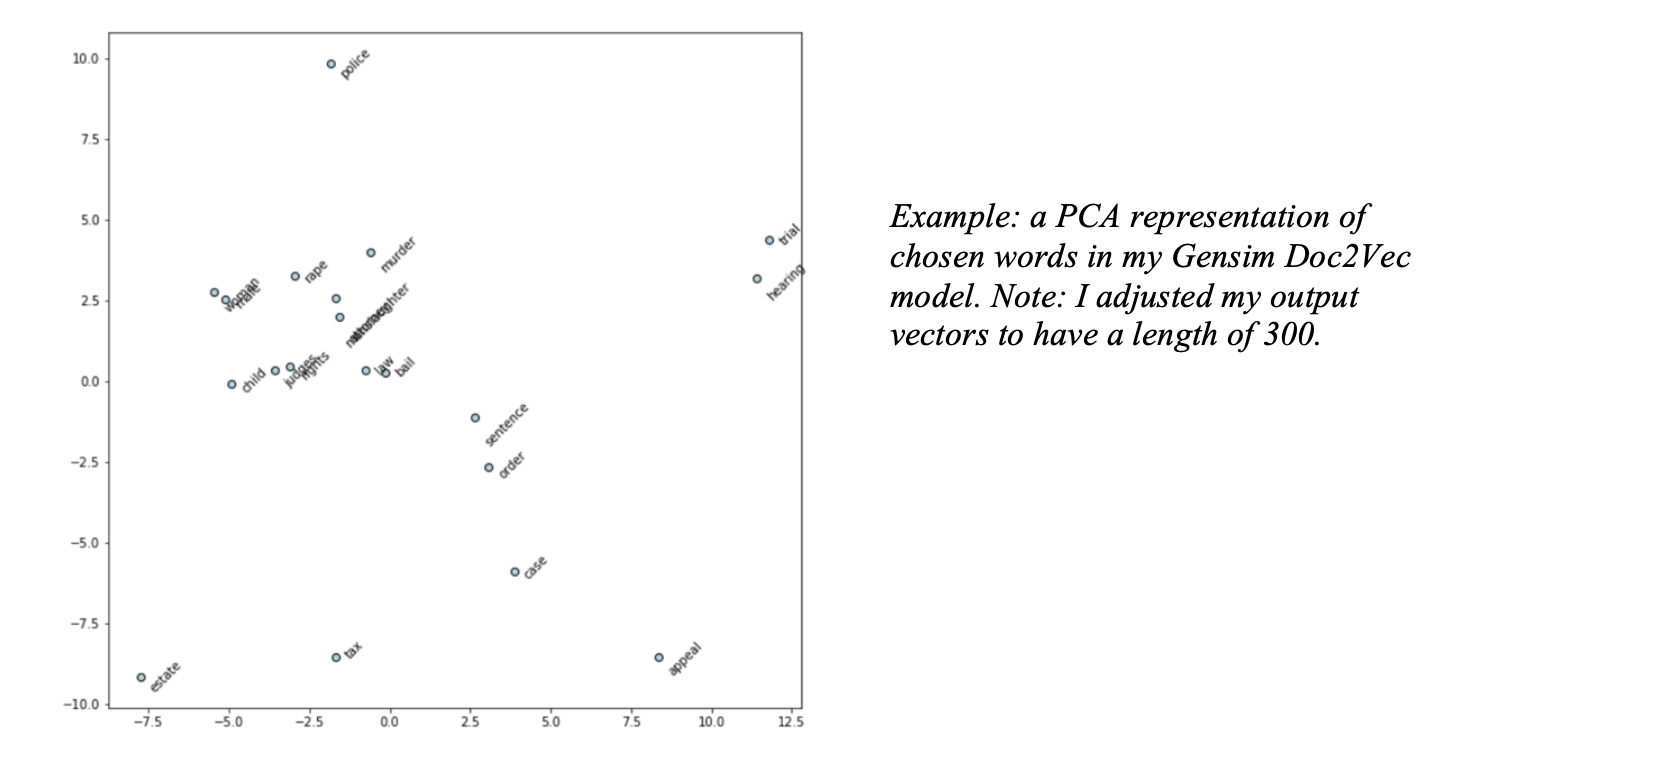 Example: a PCA representation of chosen words in my Gensim Doc2Vec model. Note: I adjusted my output vectors to have a length of 300.